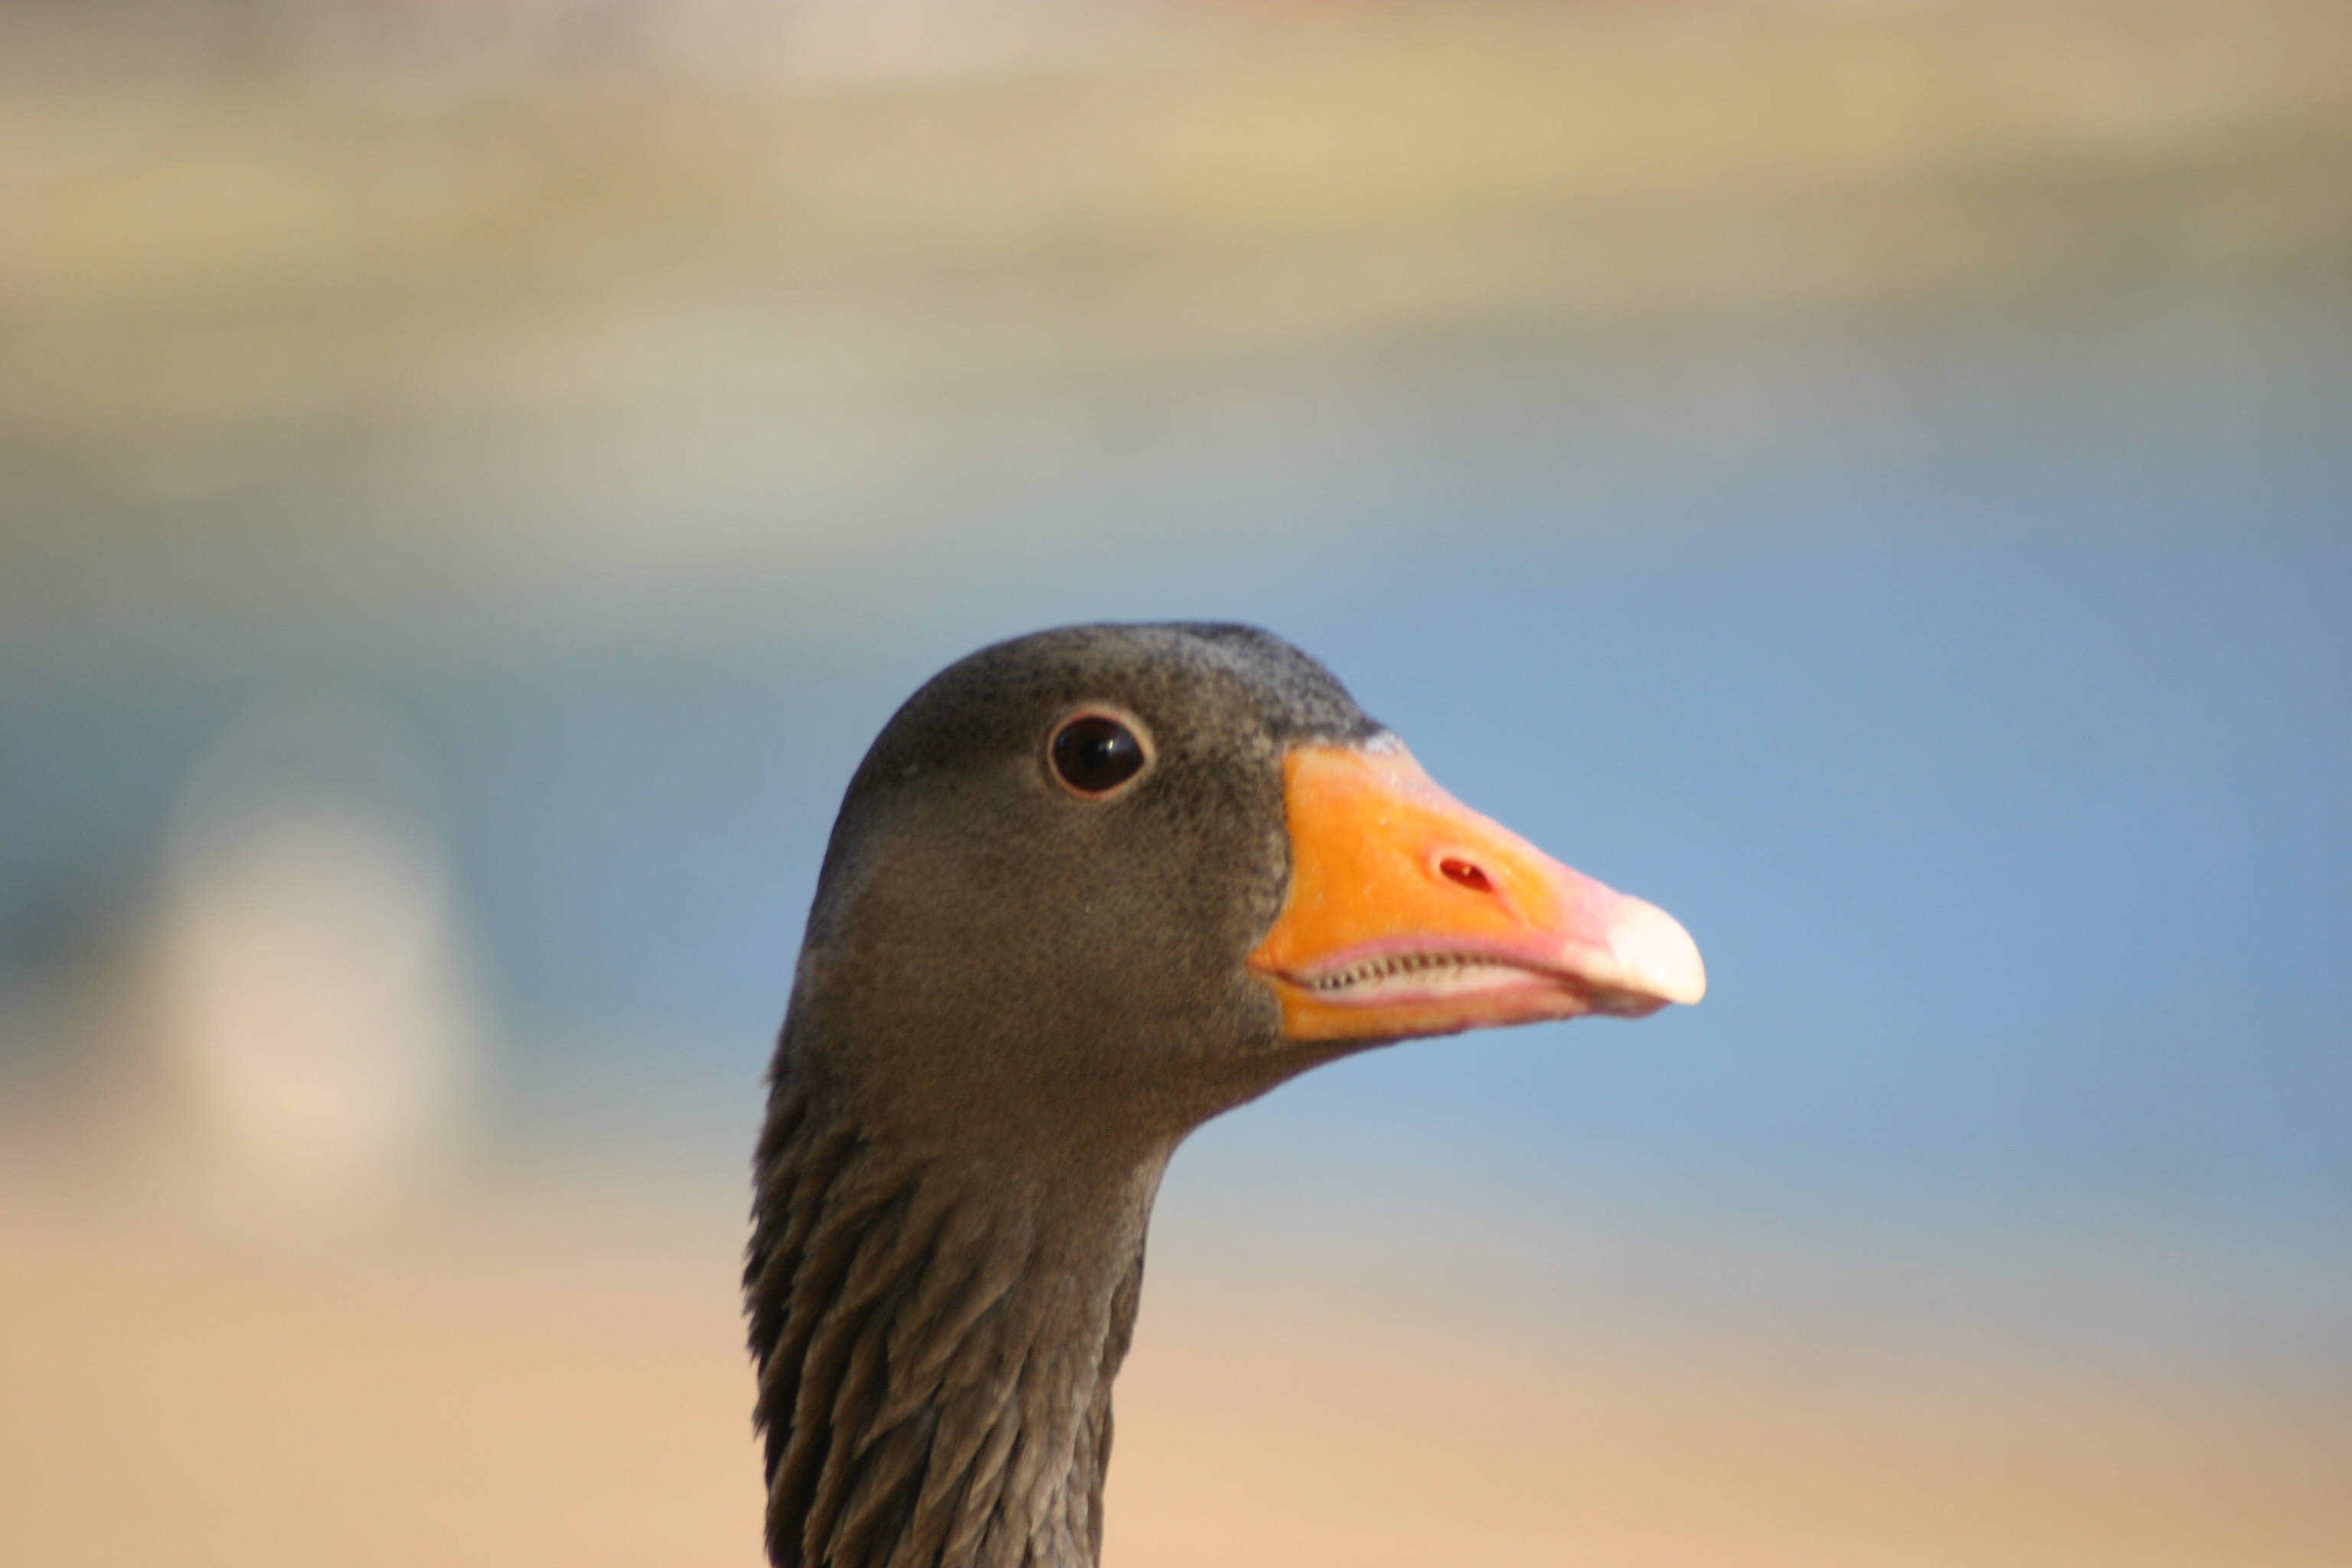 File:Close up on goose.jpg - Wikimedia Commons